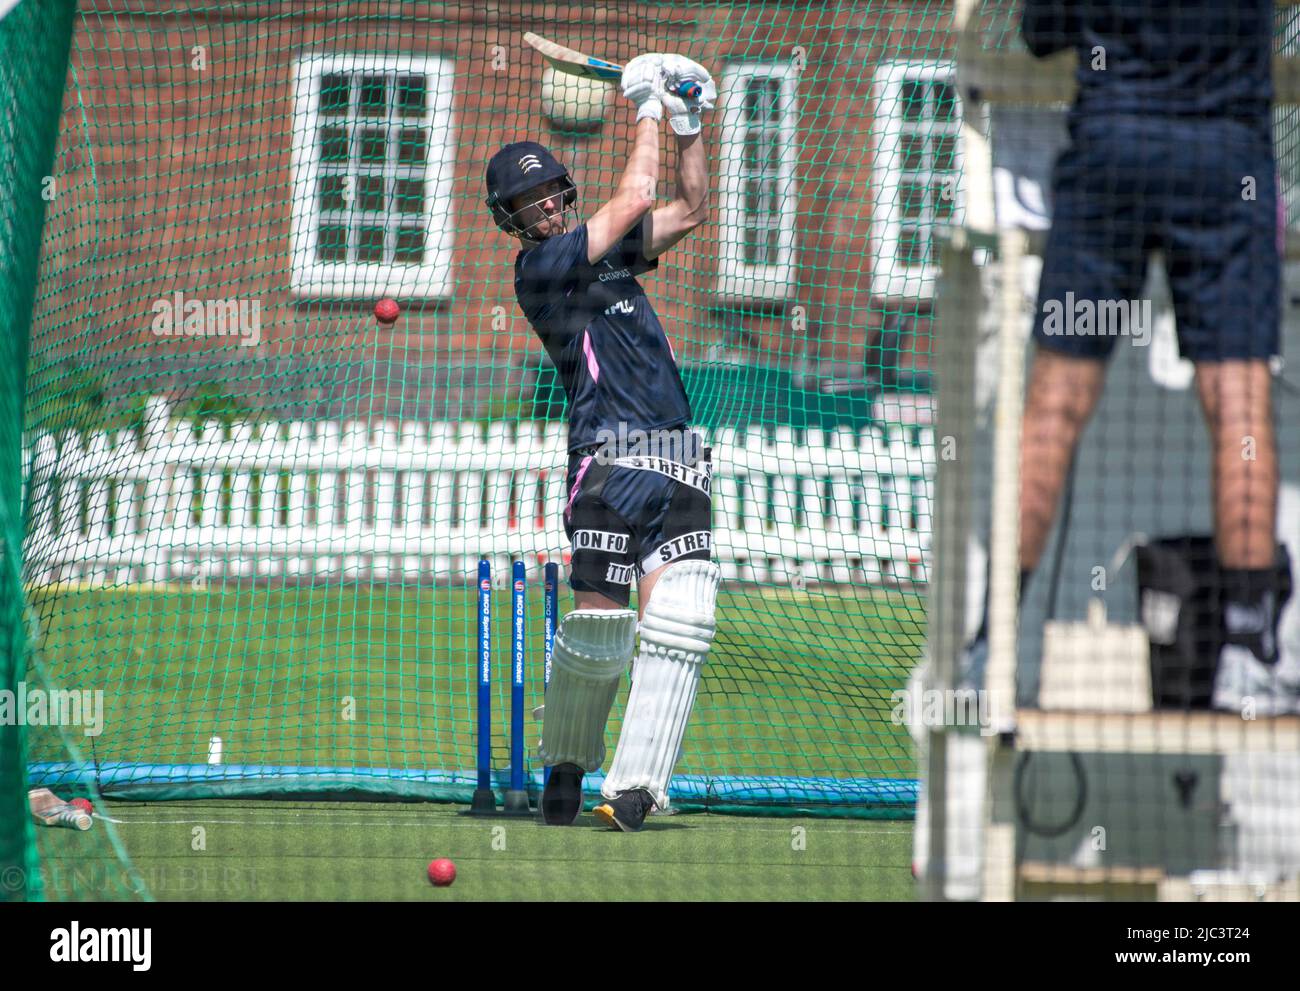 Toby Roland-Jones smashes the ball in the nets during a Middlesex Training session on the 17th of May 2022 Stock Photo